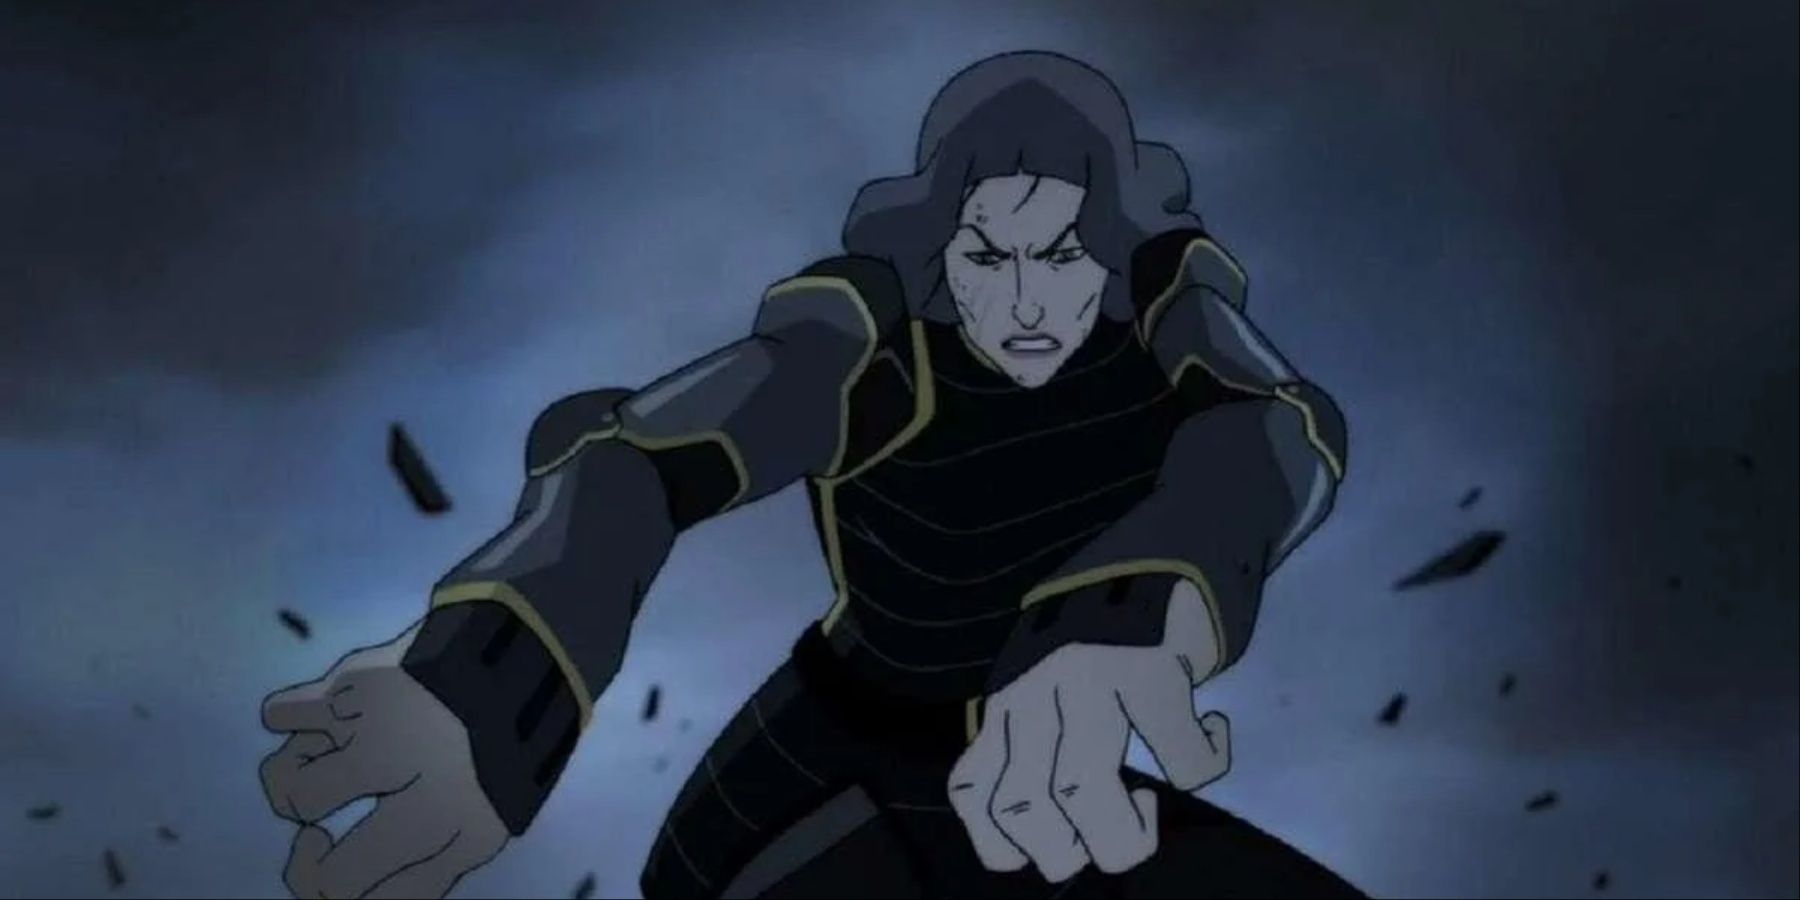 Lin Beifong Metalbending While Fighting The Equalists In Legend Of Korra